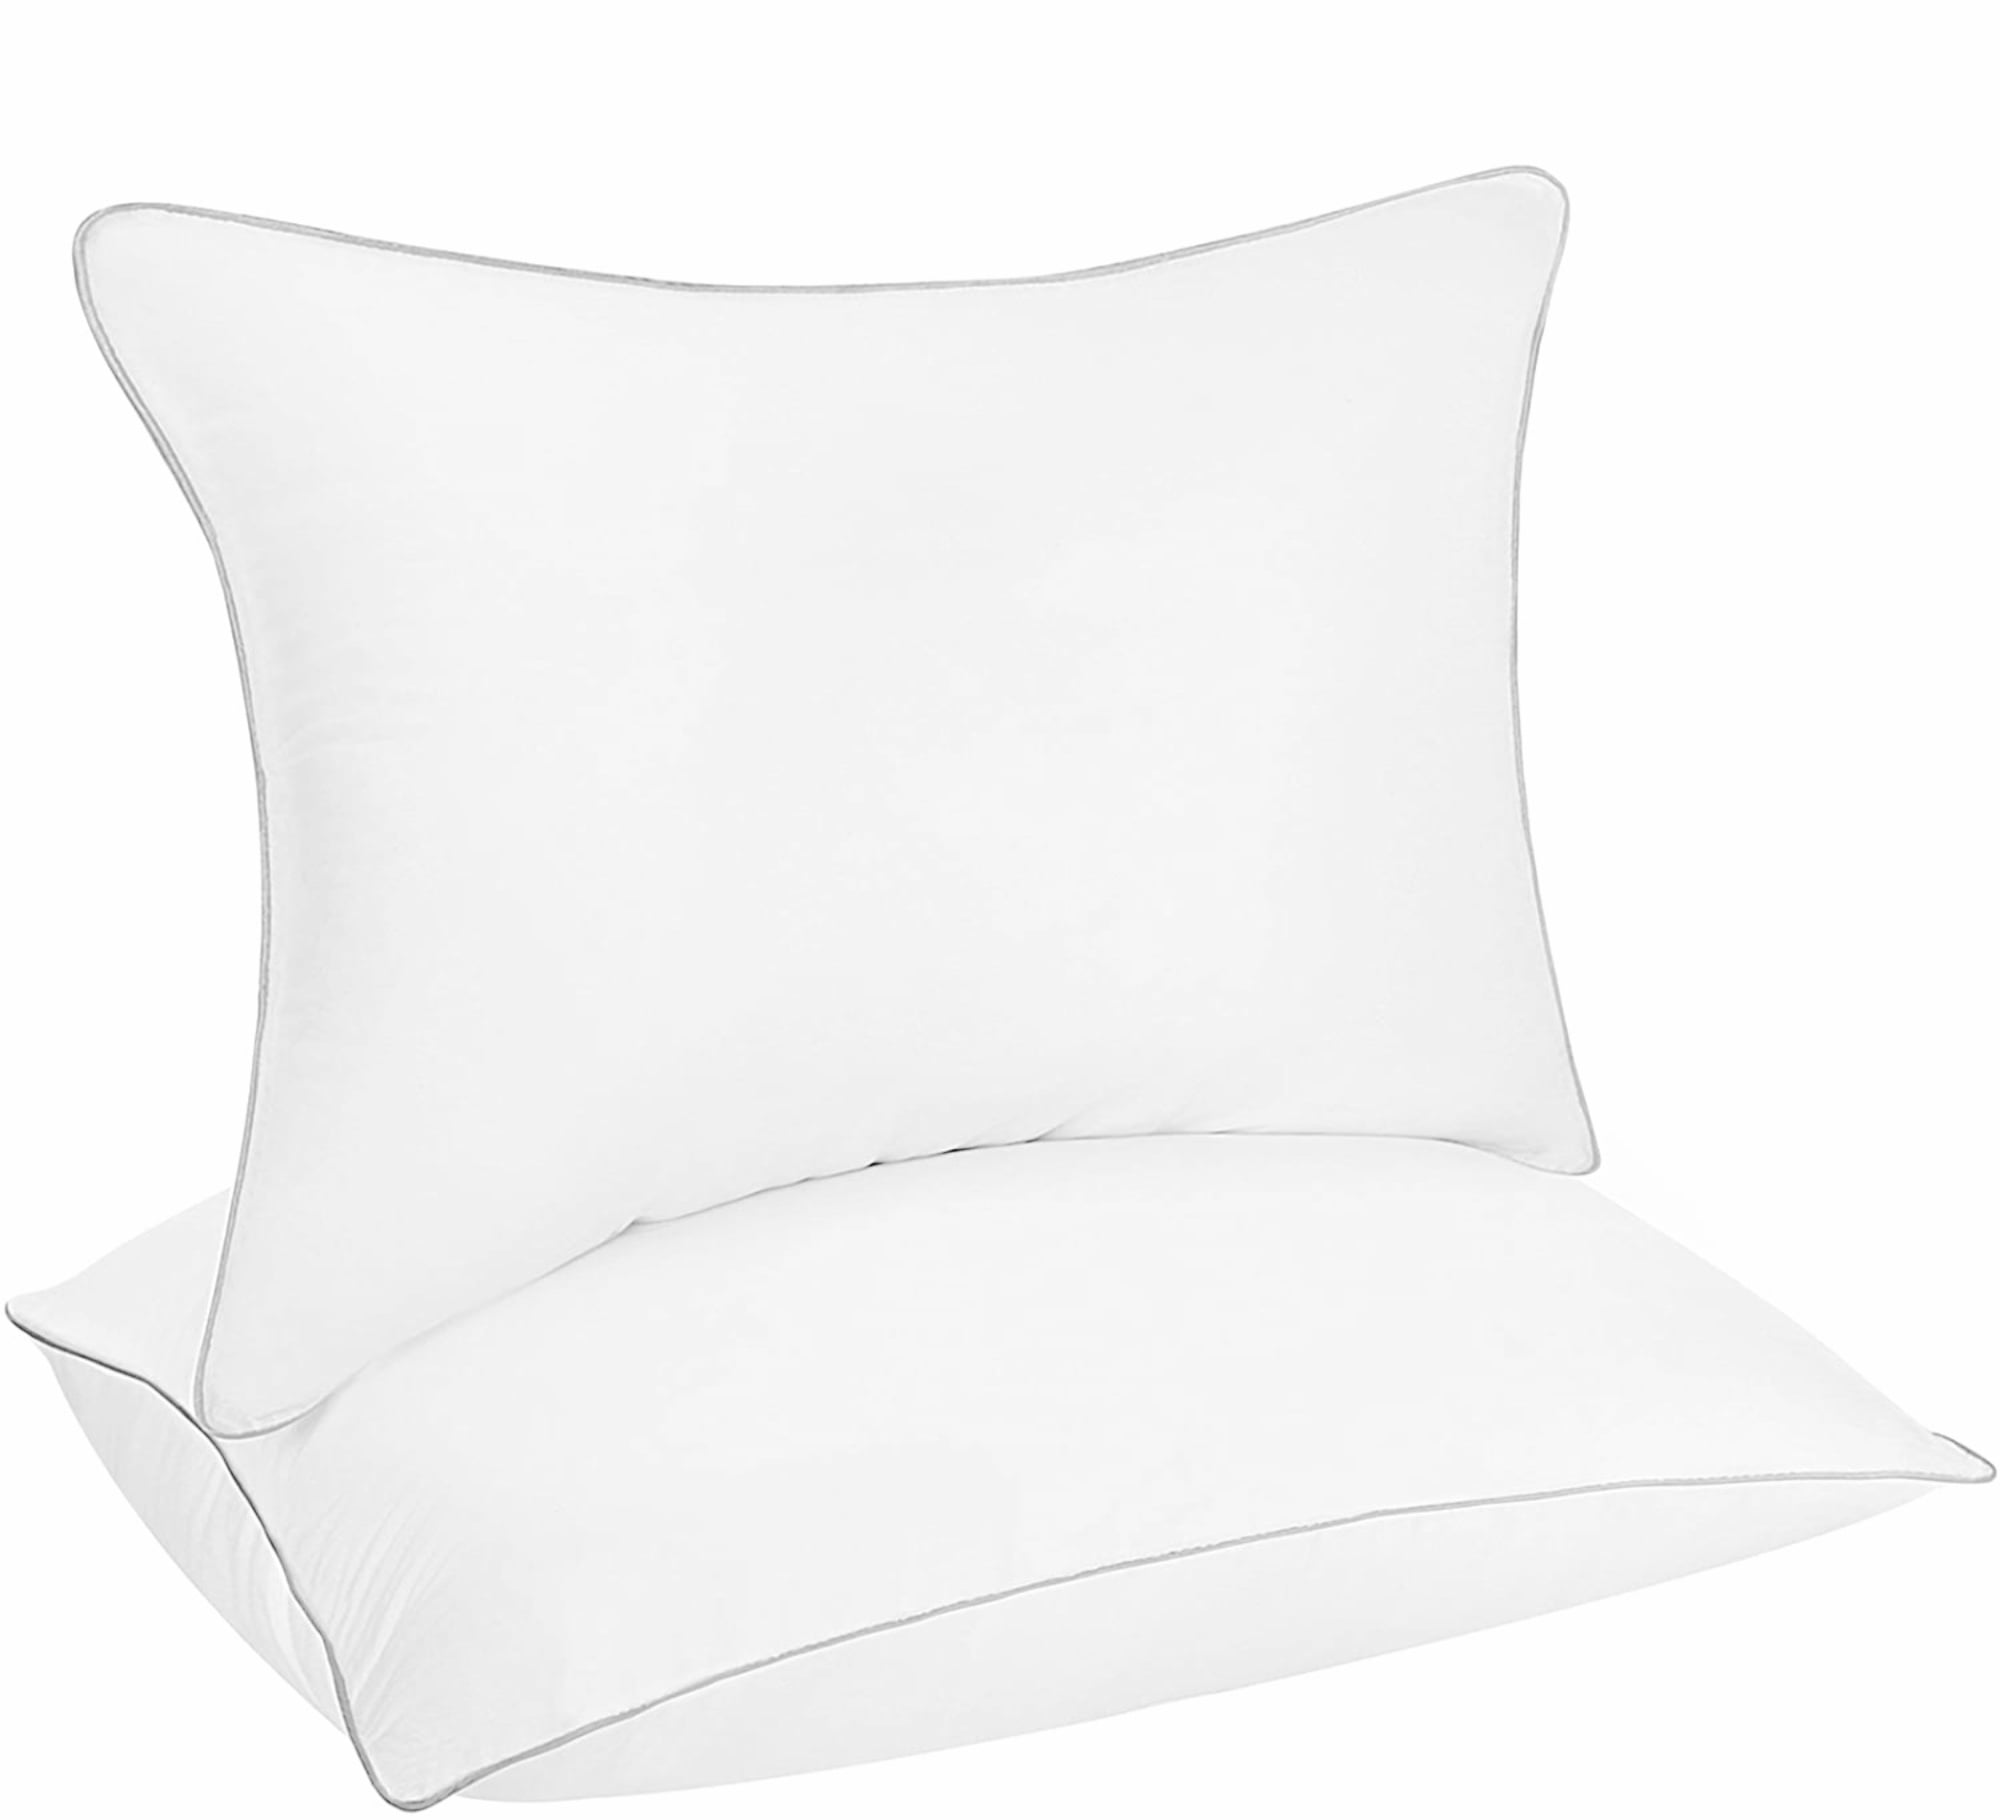 Set of 2 with Luxury Hotel Collection Quality and Side Sleepers Stomach HOKEKI Bed Pillows for Sleeping White 20X30 Down Alternative Hypoallergenic Gel Fluffy Cooling Pillow for Back Queen Size